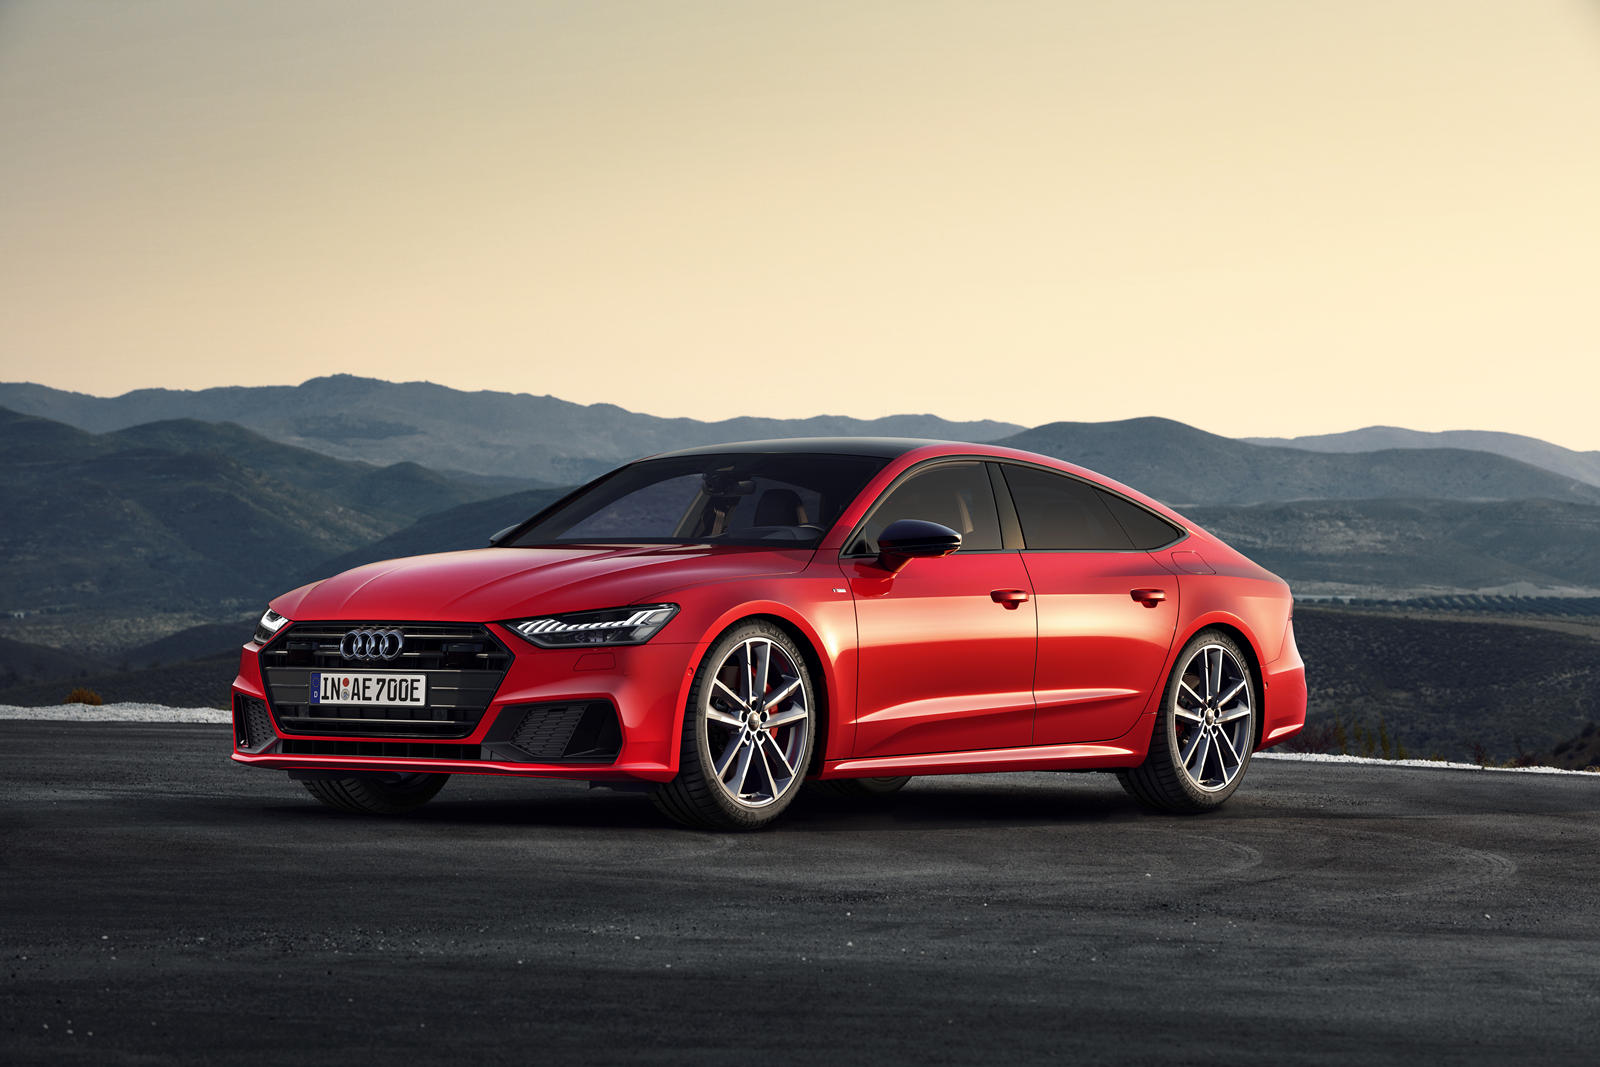 2021 Audi A7 Hybrid Review, Trims, Specs, Price, New Interior Features